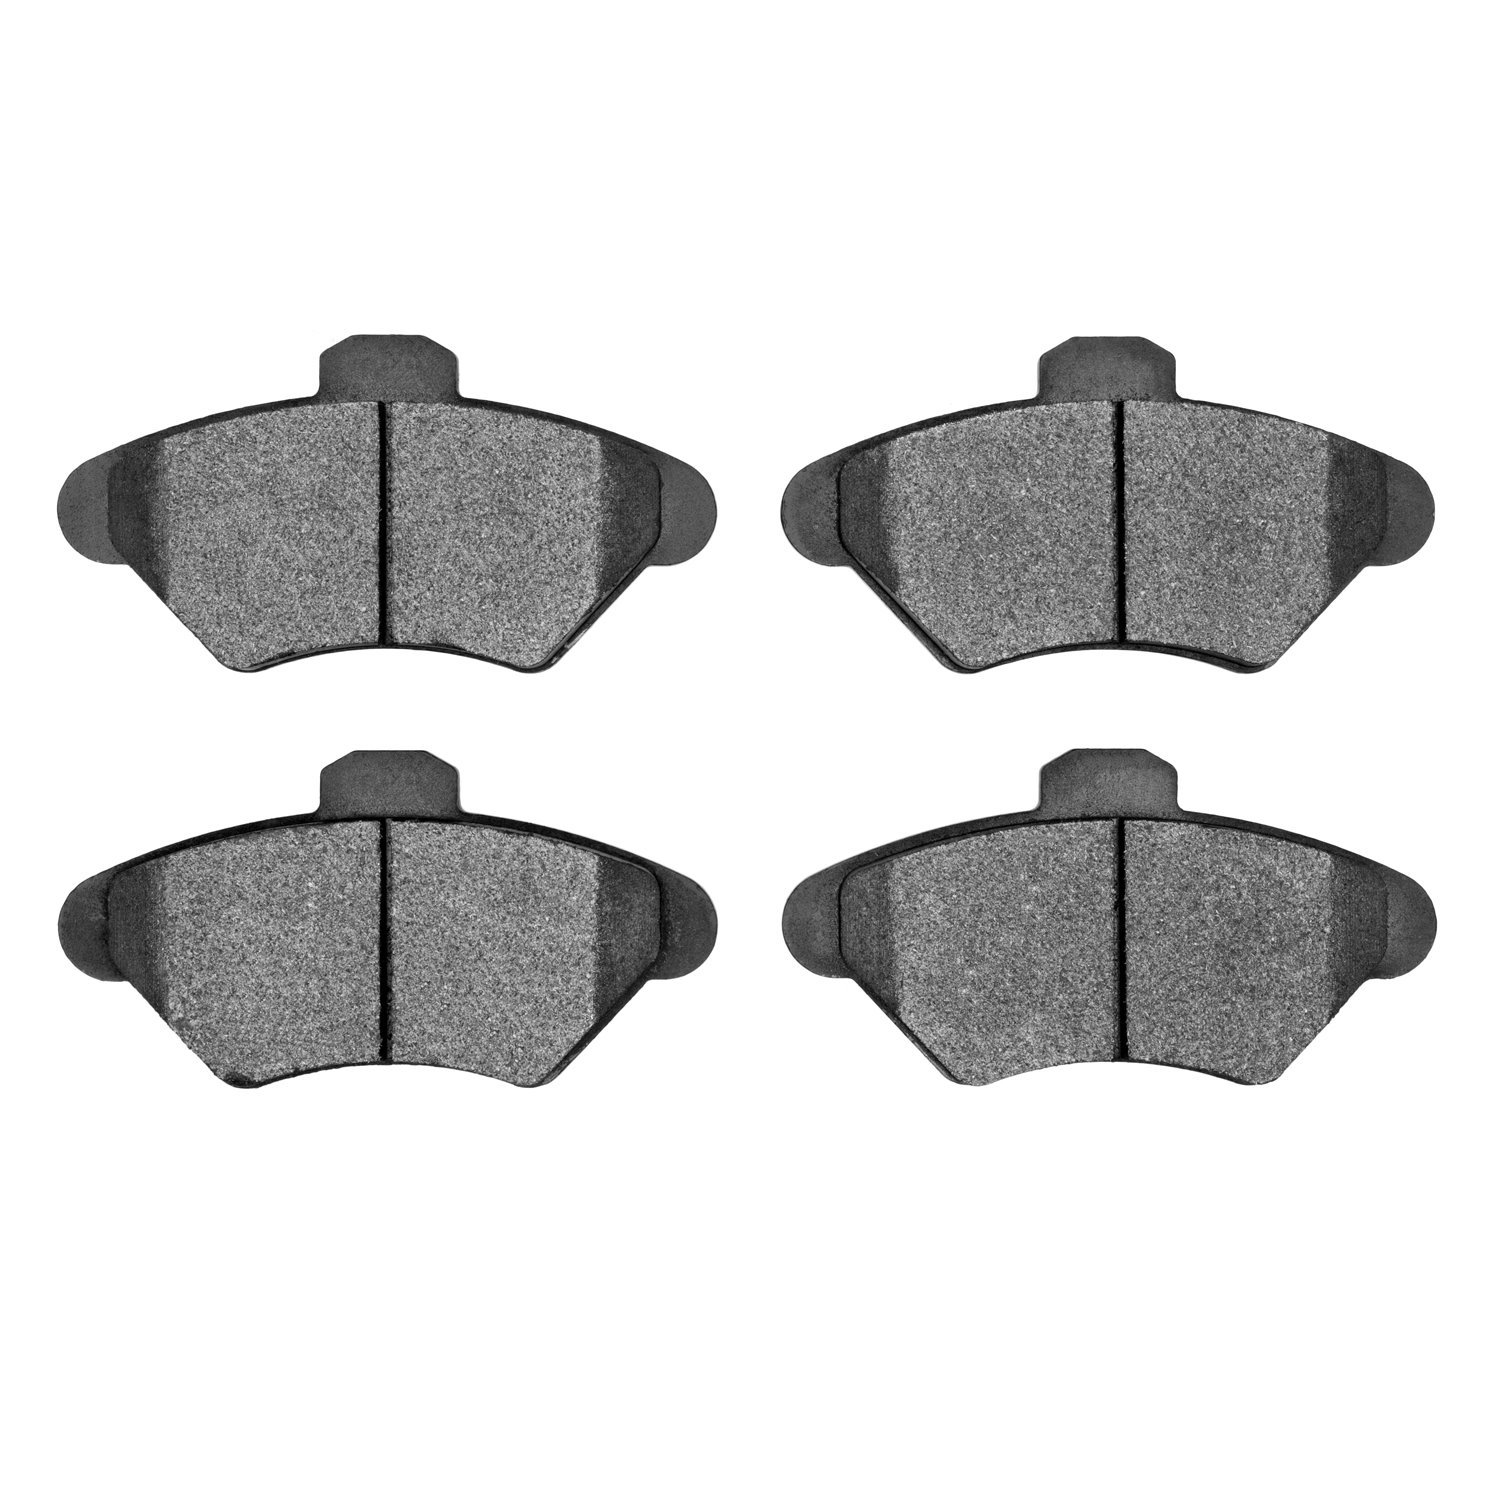 1000-0600-00 Track/Street Low-Metallic Brake Pads Kit, 1993-1998 Ford/Lincoln/Mercury/Mazda, Position: Front